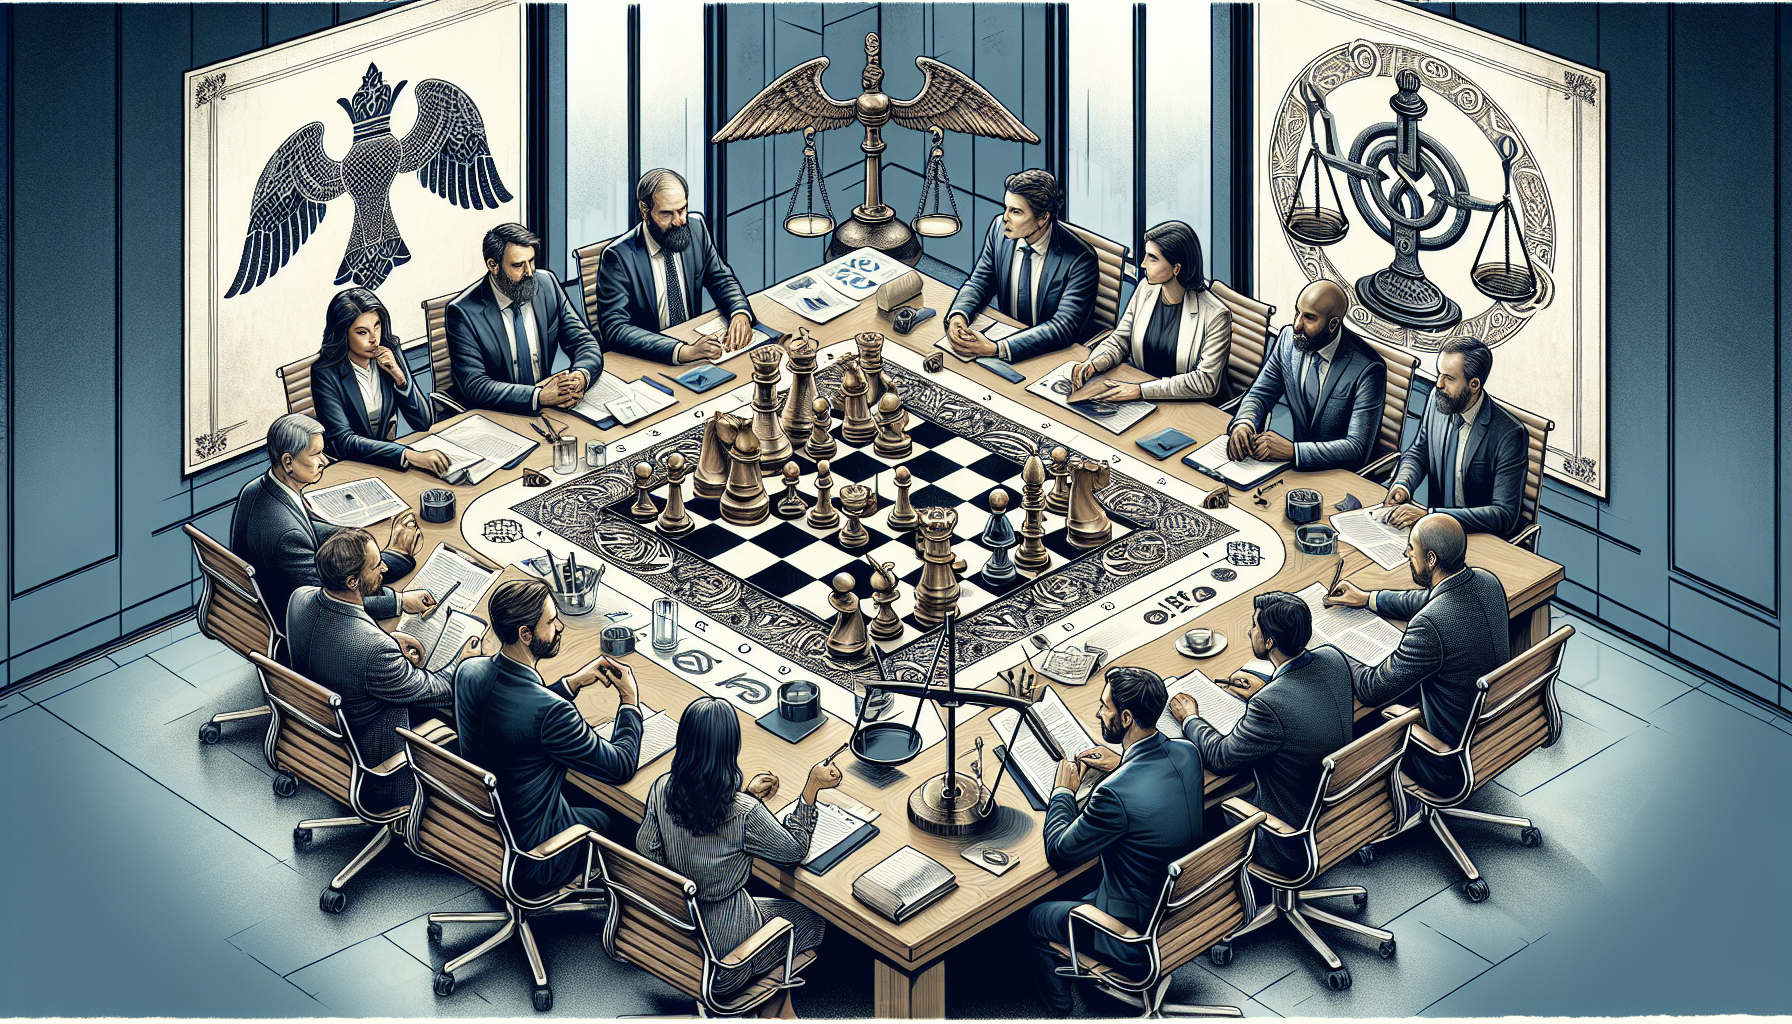 Illustration of a corporate meeting discussing company restructuring